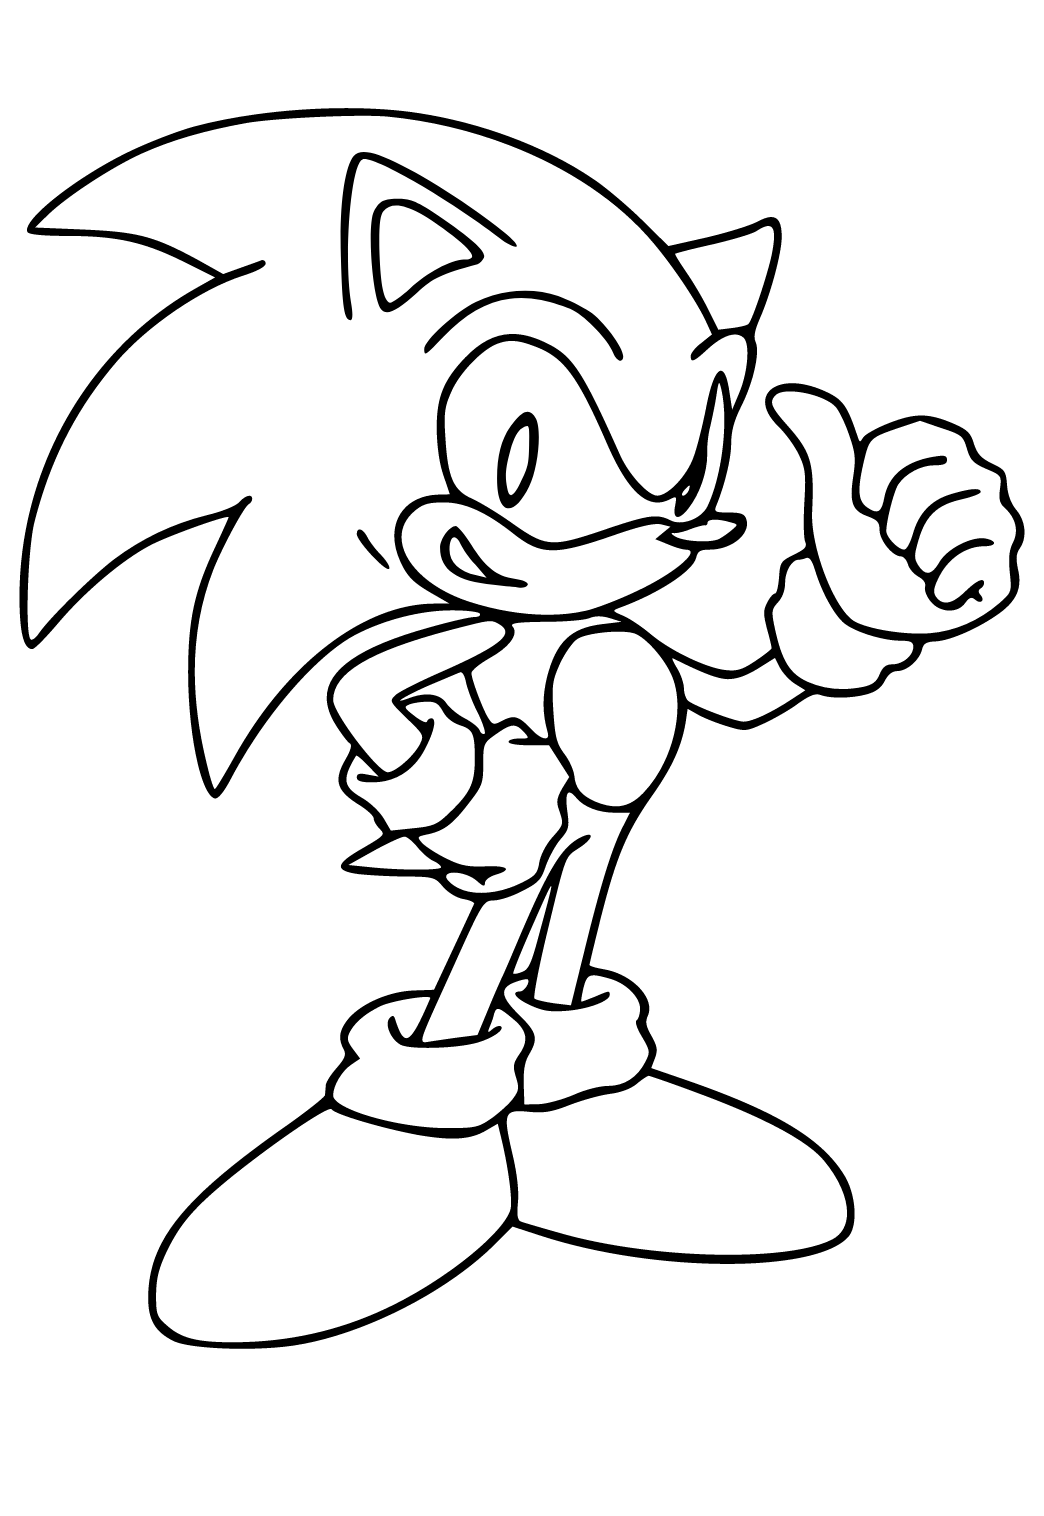 Free Printable Sonic Prime Coloring Page, Sheet and Picture for Adults and  Kids (Girls and Boys) - Babeled.com